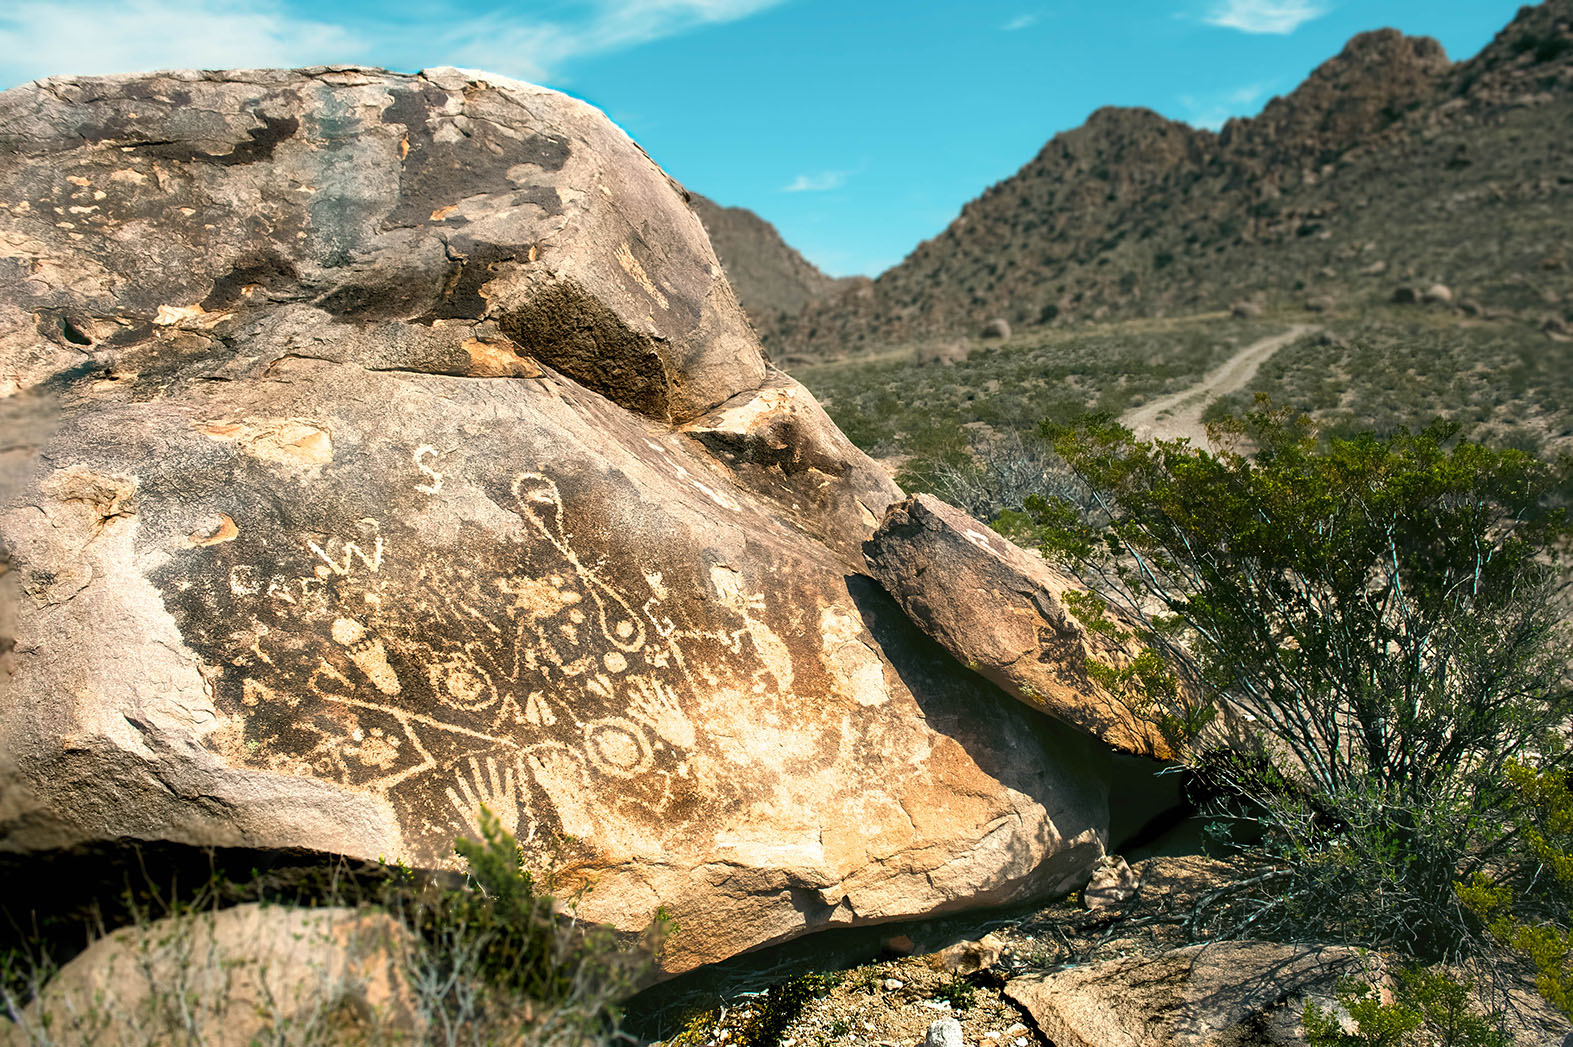 A boulder etched with Native American petroglyphs sits before a stunning mountain range.